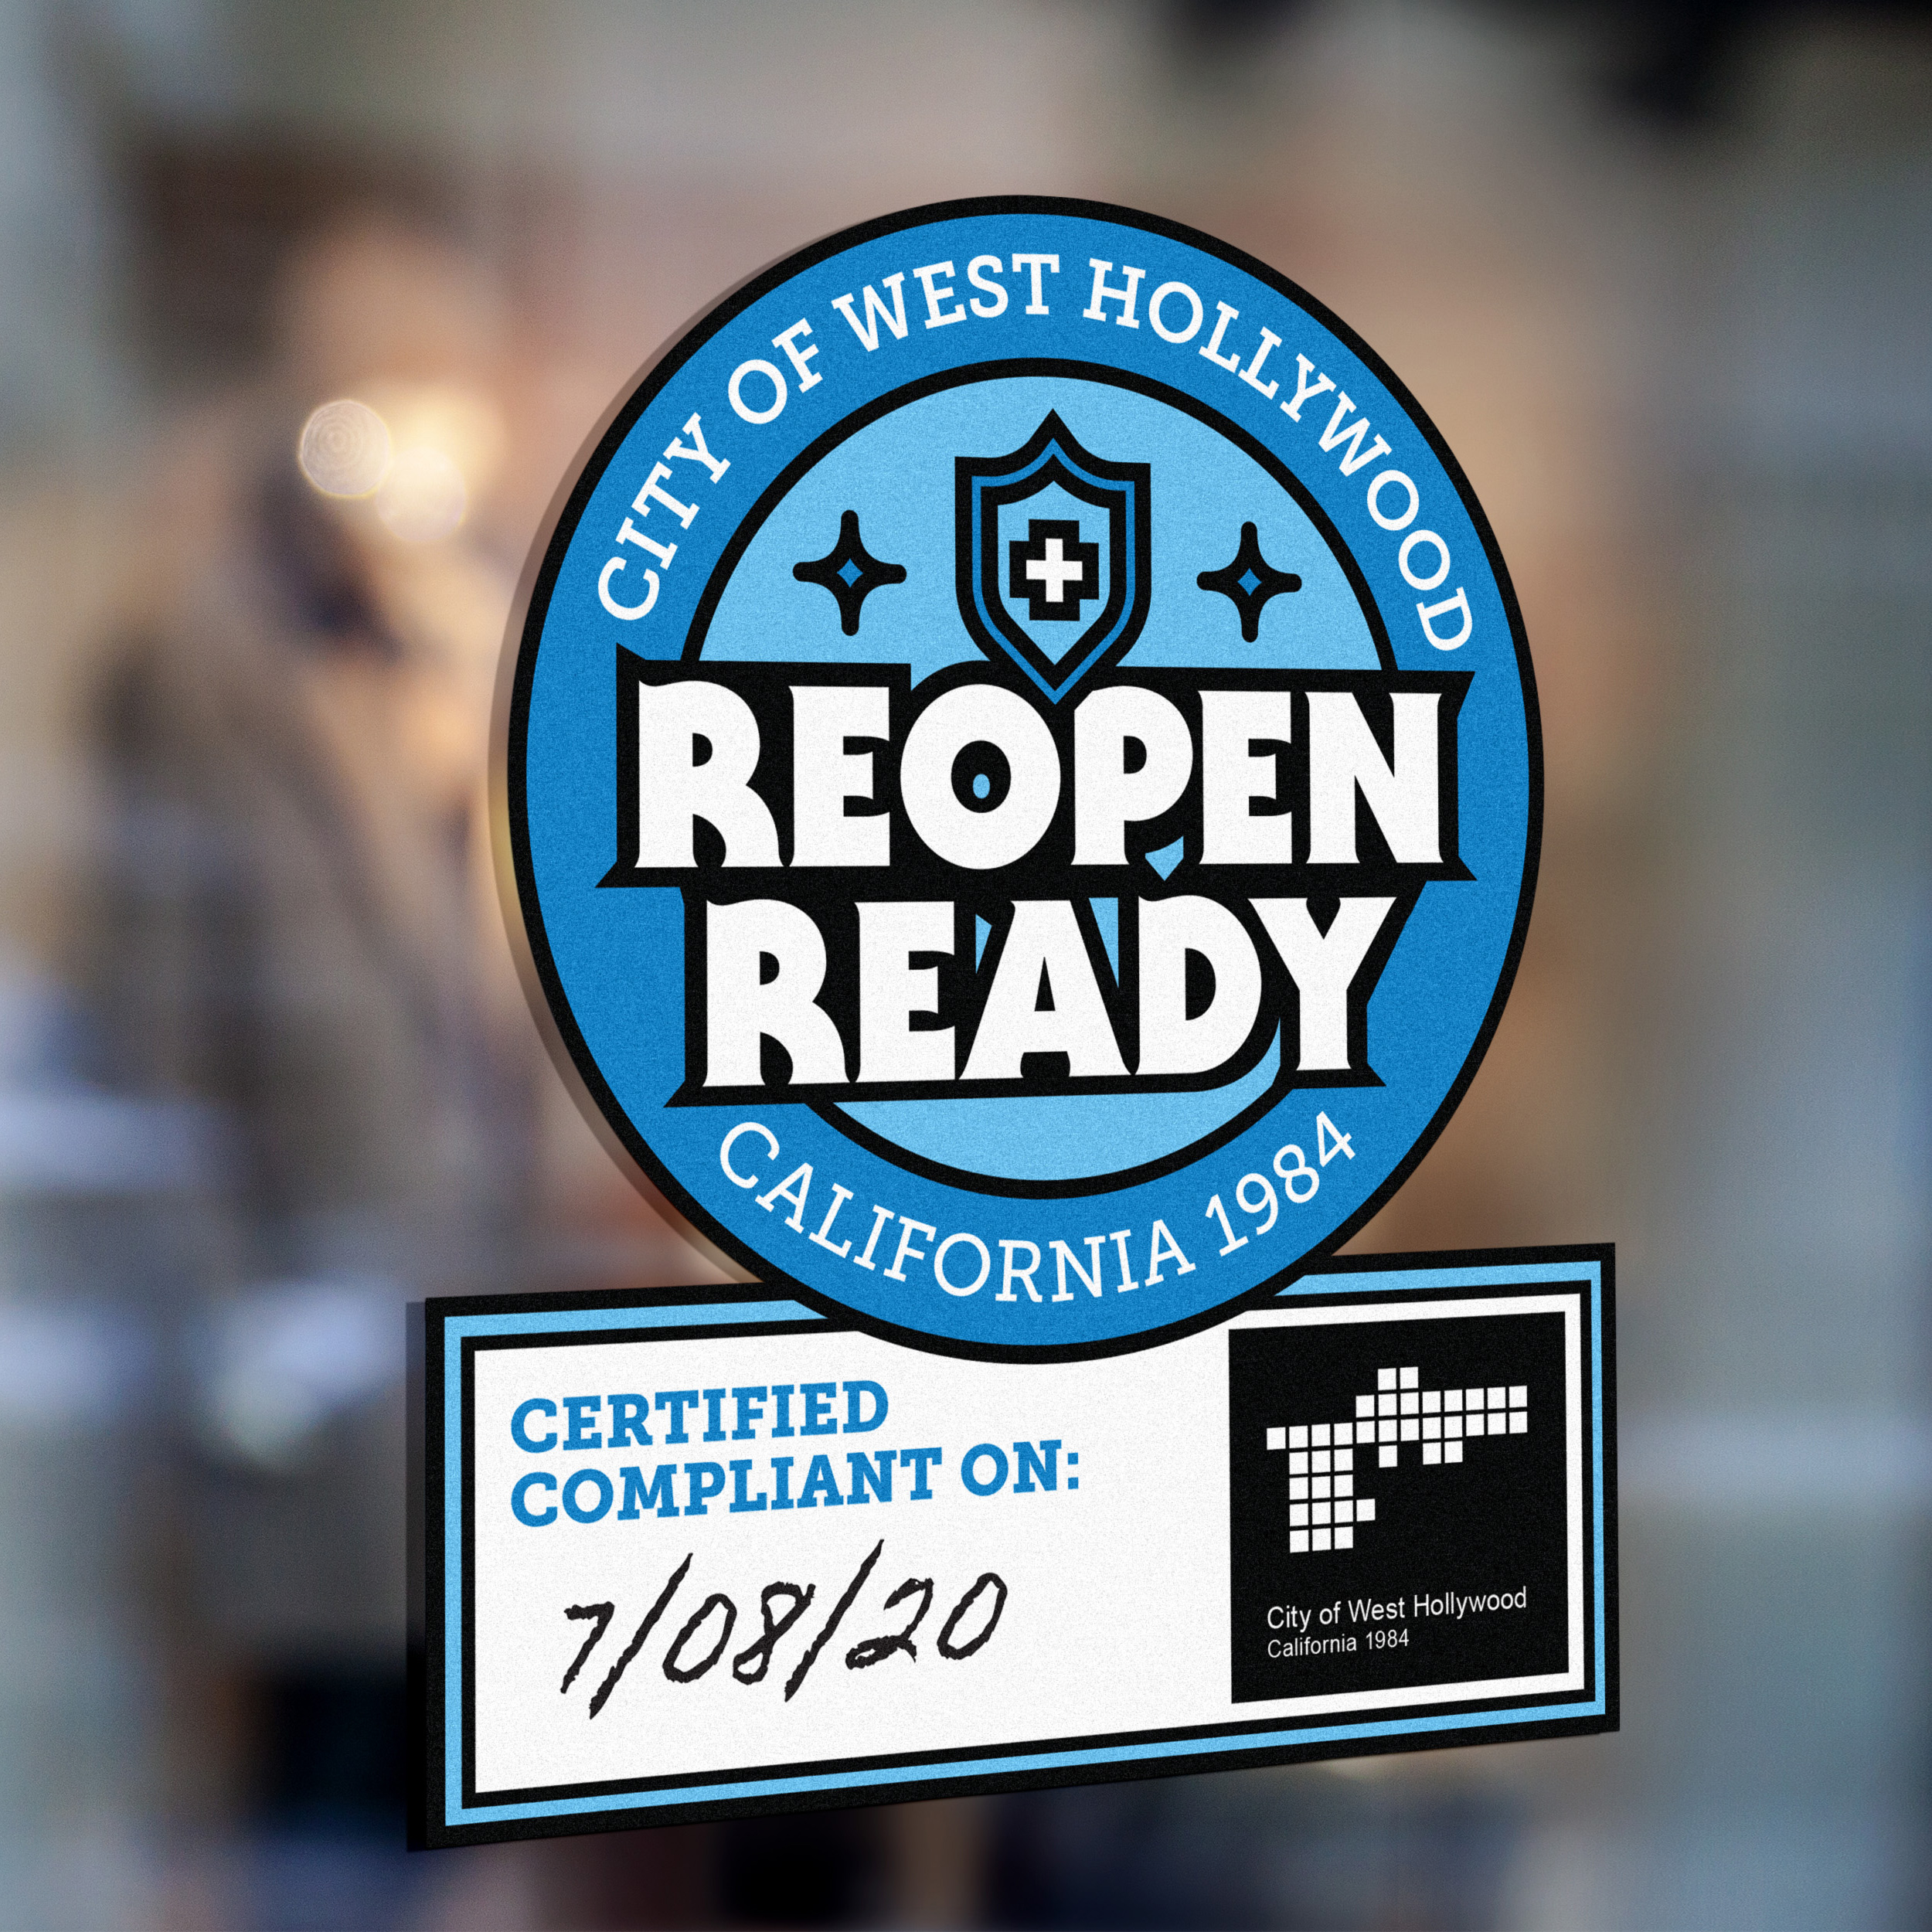 Reopen Ready window sticker. Part of the City of West Hollywood COVID-19 response campaign designed by Kilter.